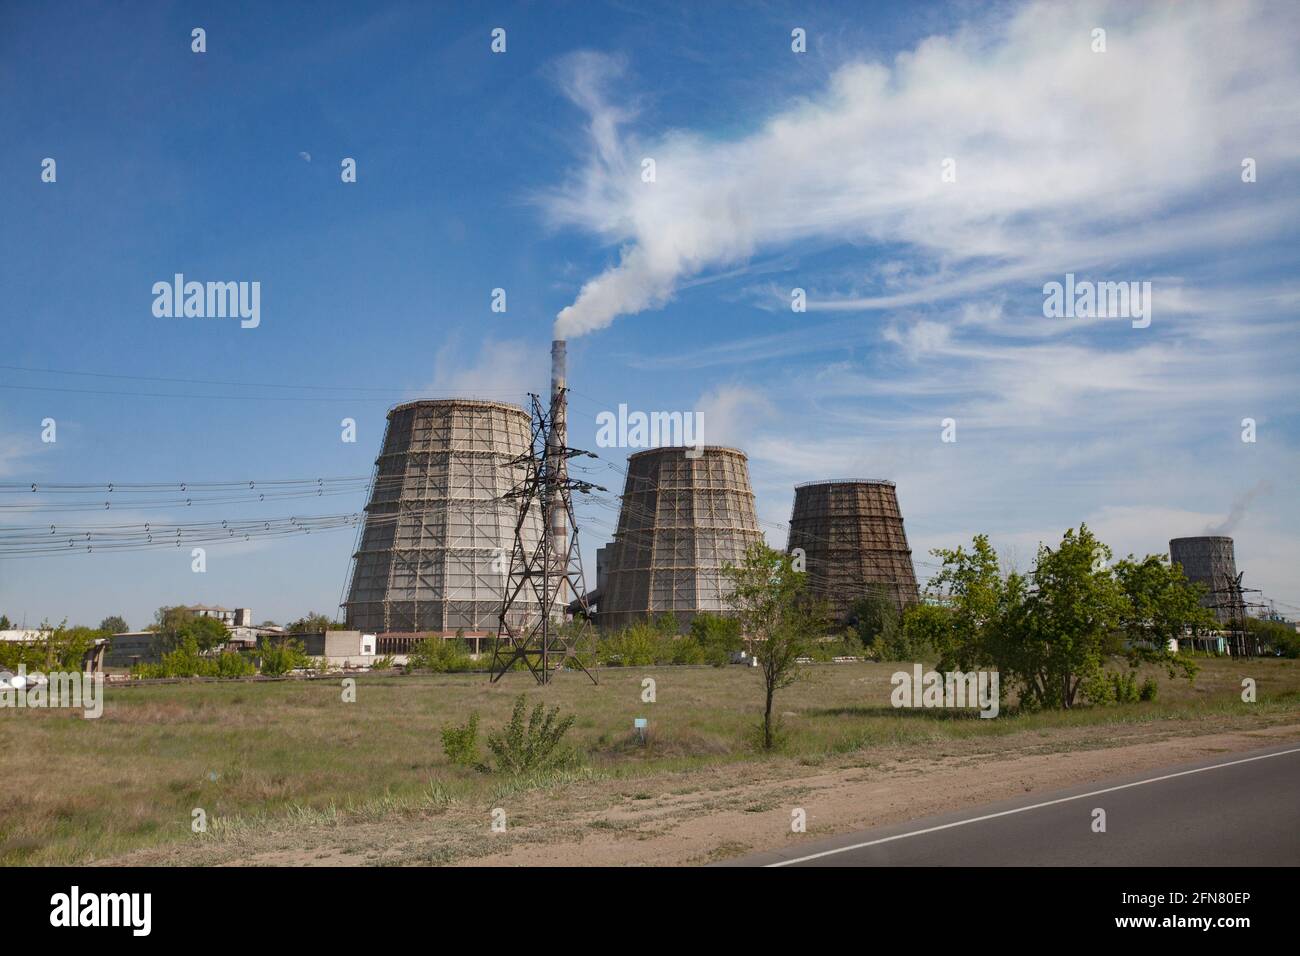 Pavlodar thermal electric station. Cooling towers and smoke stack with white smoke. Blue sky. Green grass, trees. Asphalt road right. Stock Photo